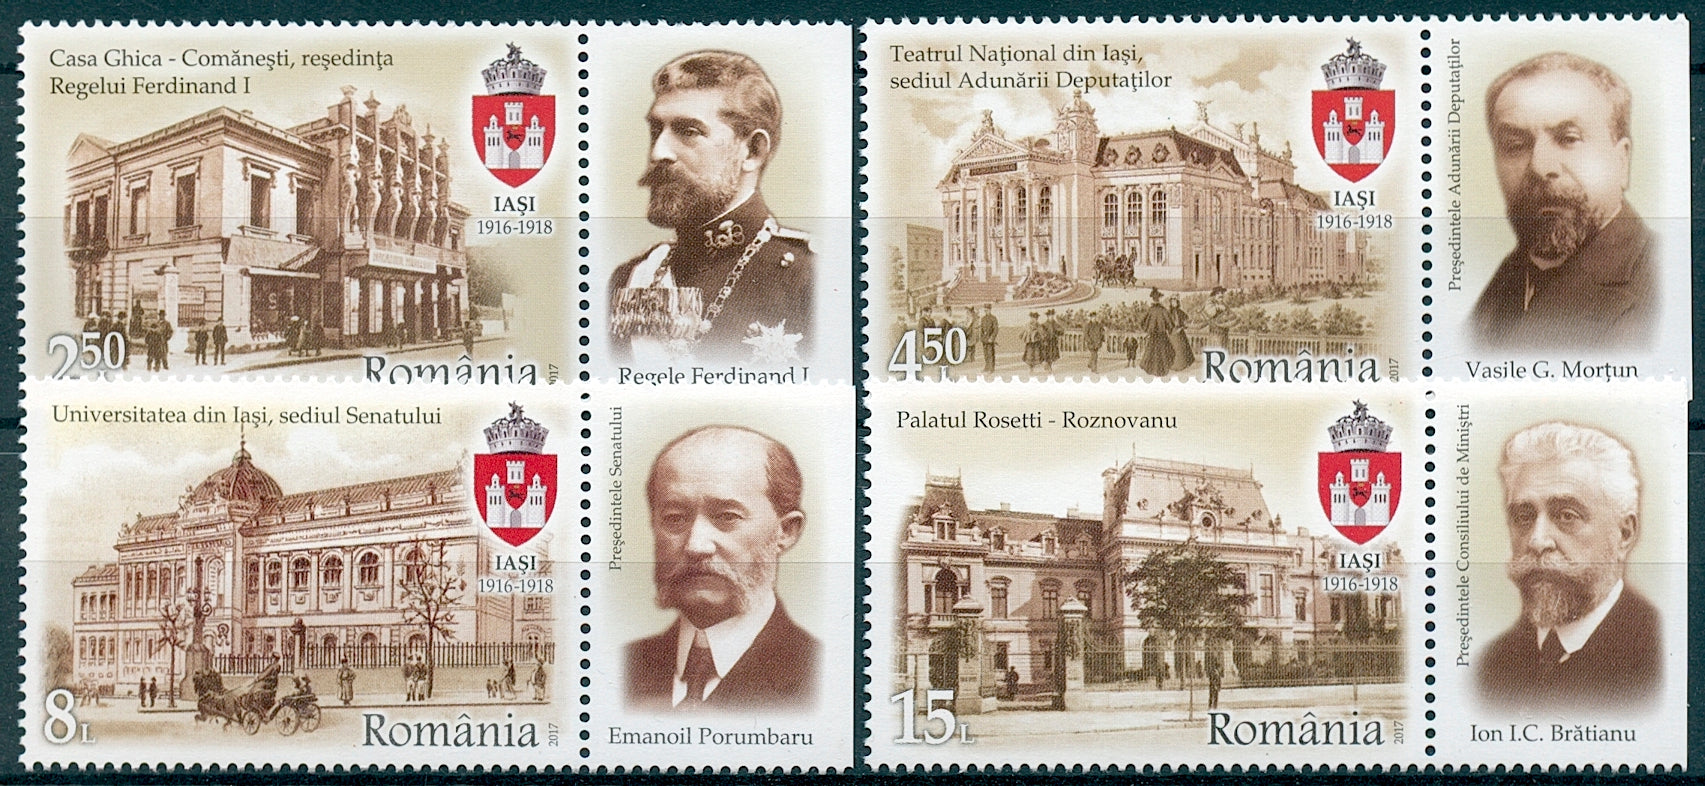 Romania 2017 MNH Iasi City of Great Union 4v Set Palaces Architecture Stamps